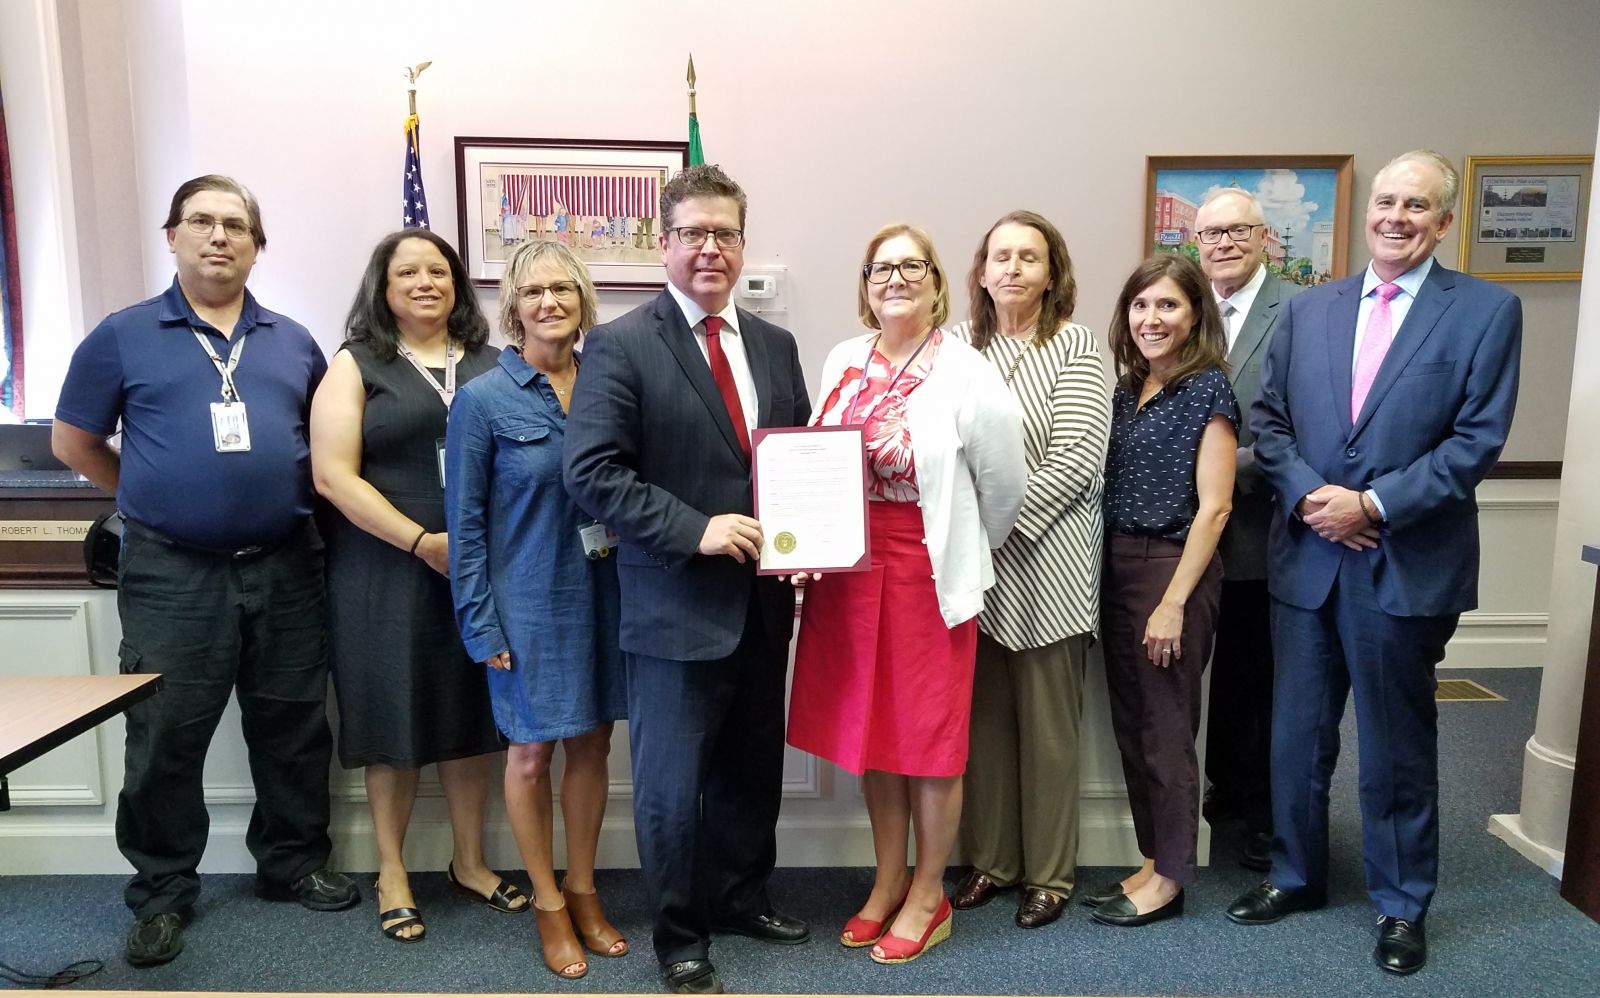 Pictured above (left to right): David Grim, Martha Nolder, Cori Seilhamer, Commissioner Chairman Dave Keller, Sherry Morgan, Ann Spottswood, Noel Purdy, Commissioner Bob Thomas, Patrick ODonnell with proclamation